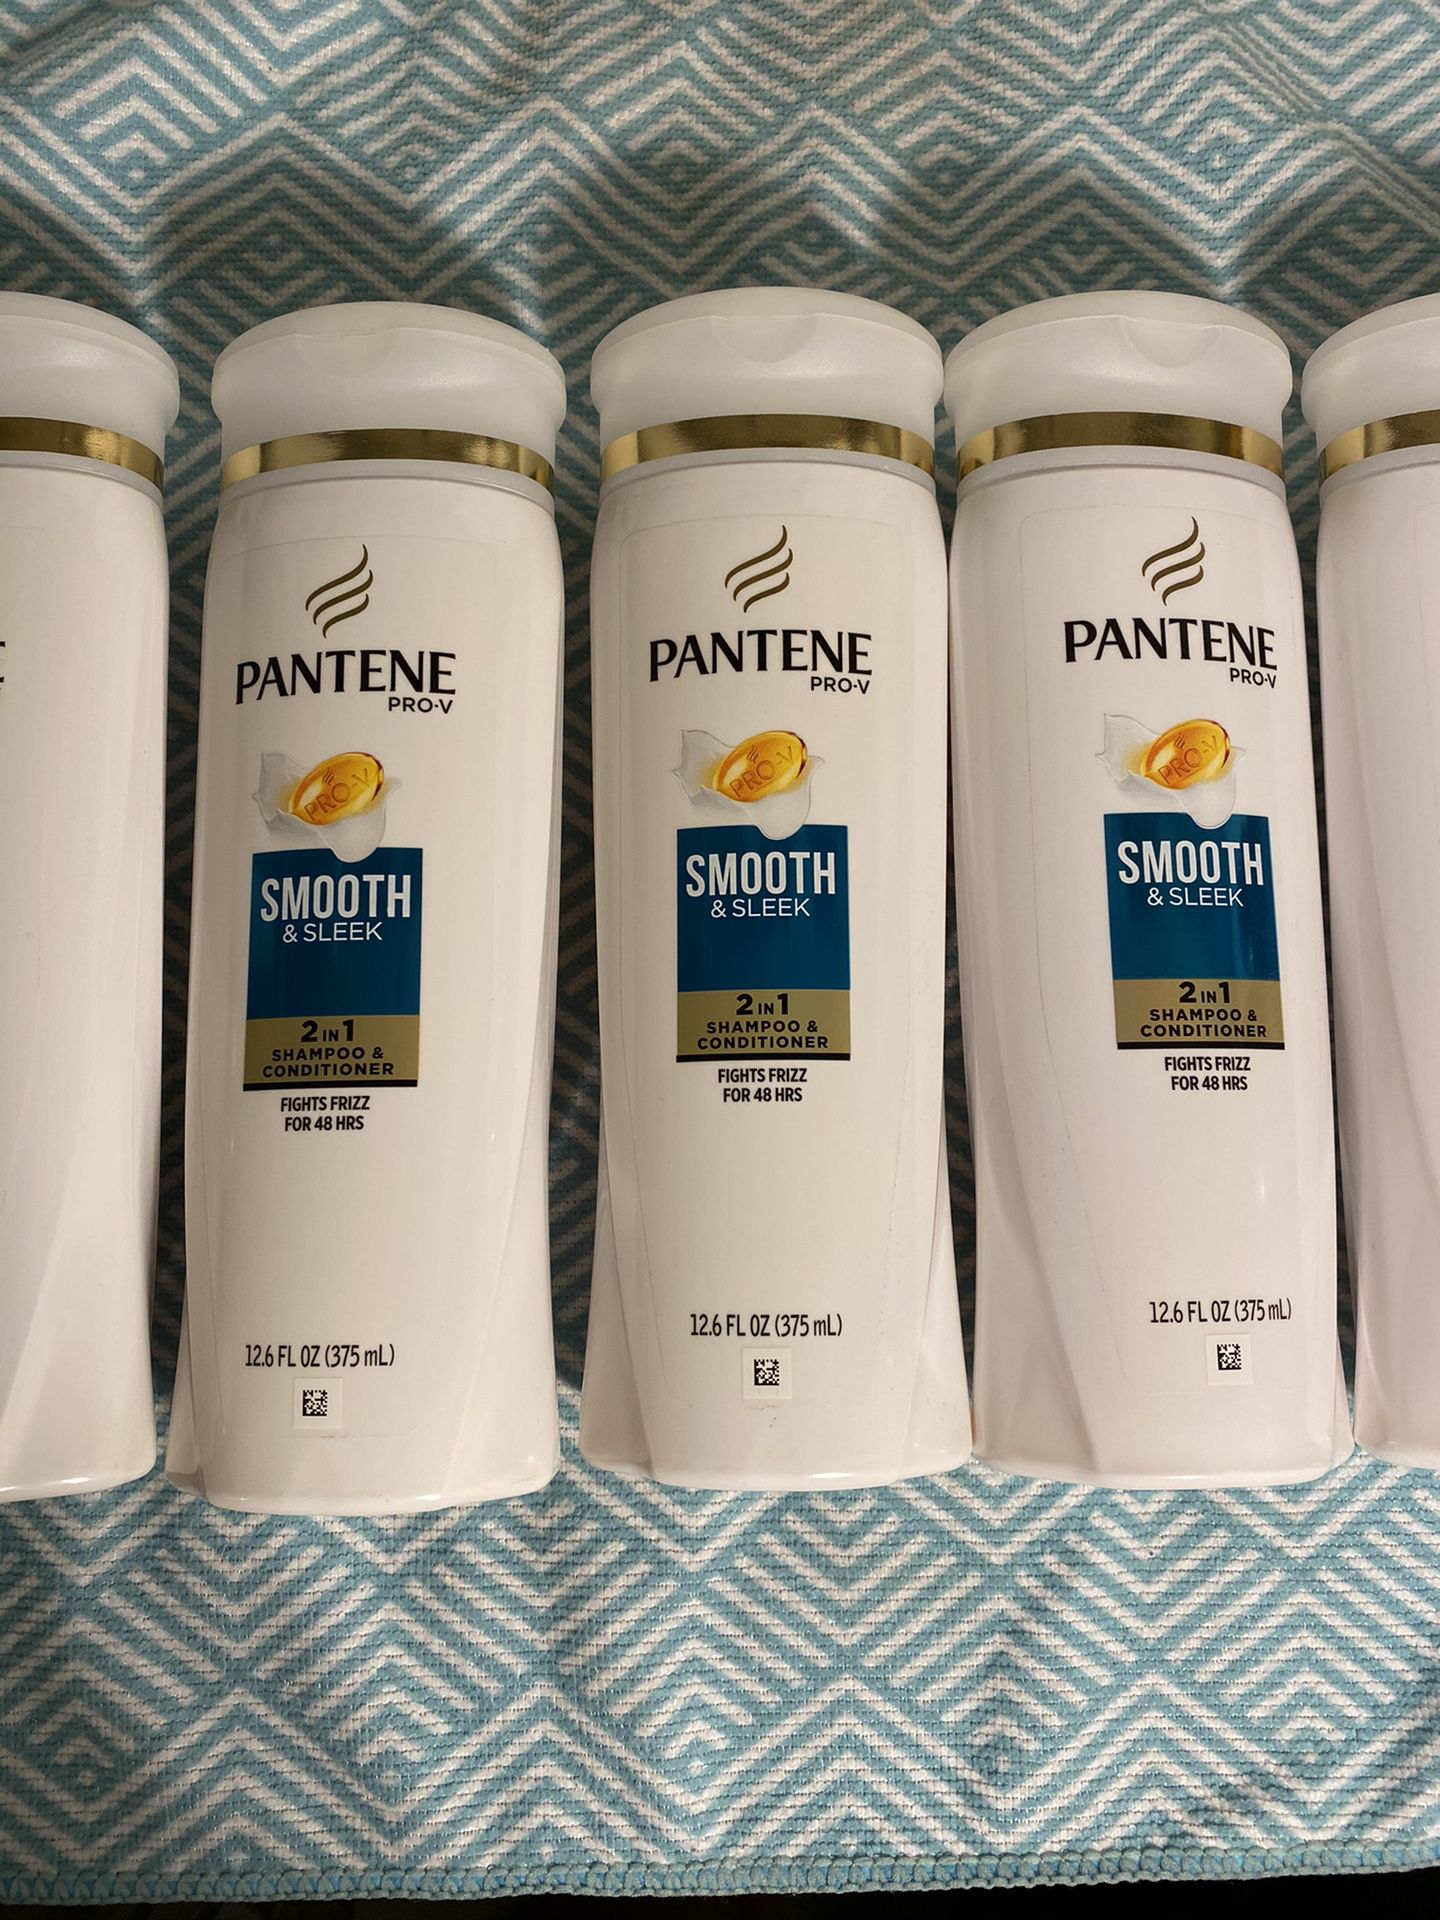 Pantene Smooth and Sleek 2 in 1 Shampoo and Conditioner